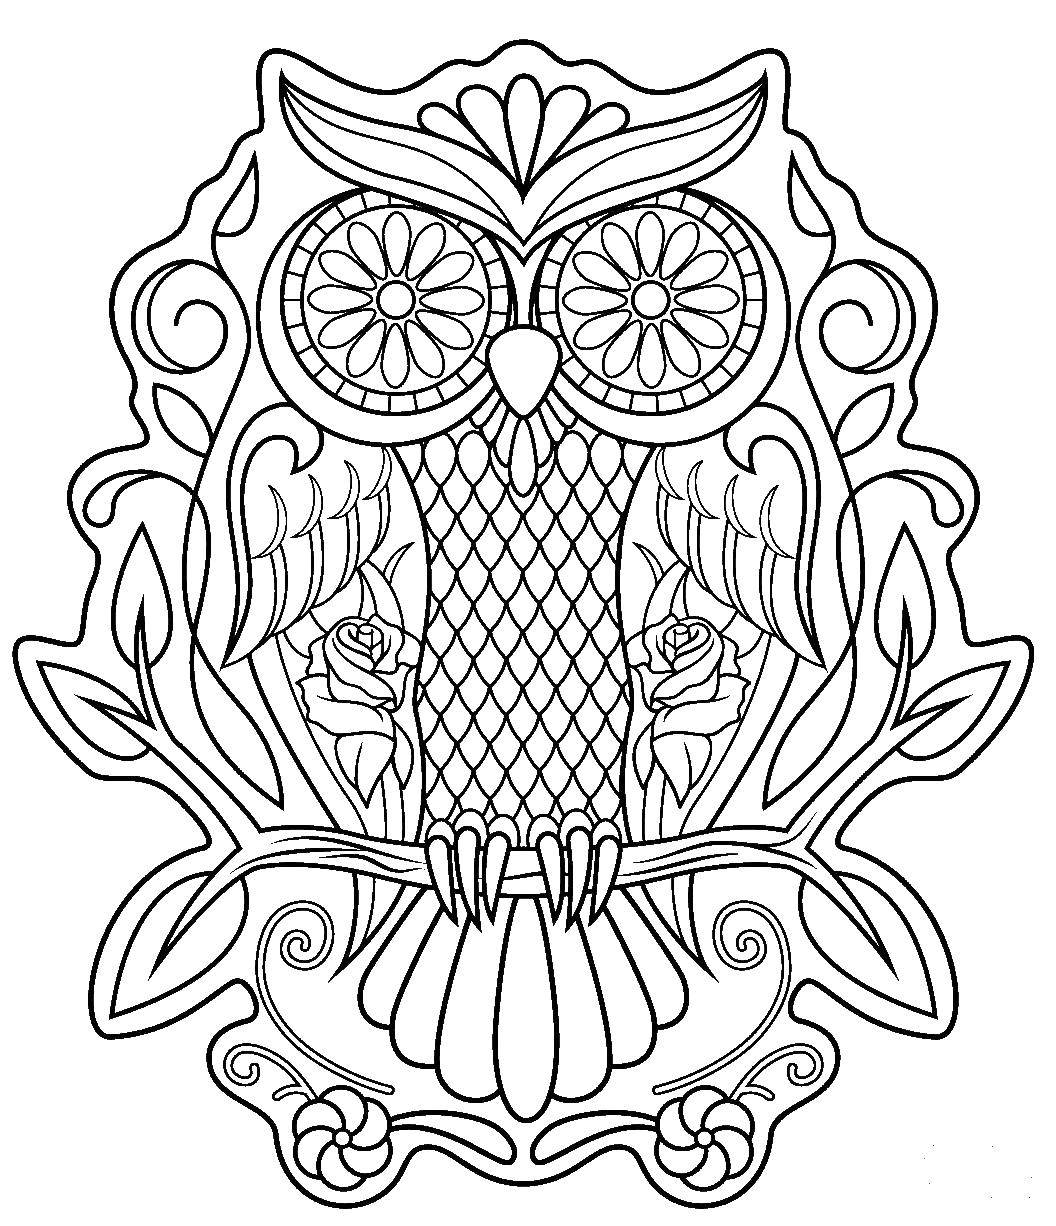 Coloring Beautiful owl. Category patterns. Tags:  Patterns, animals.